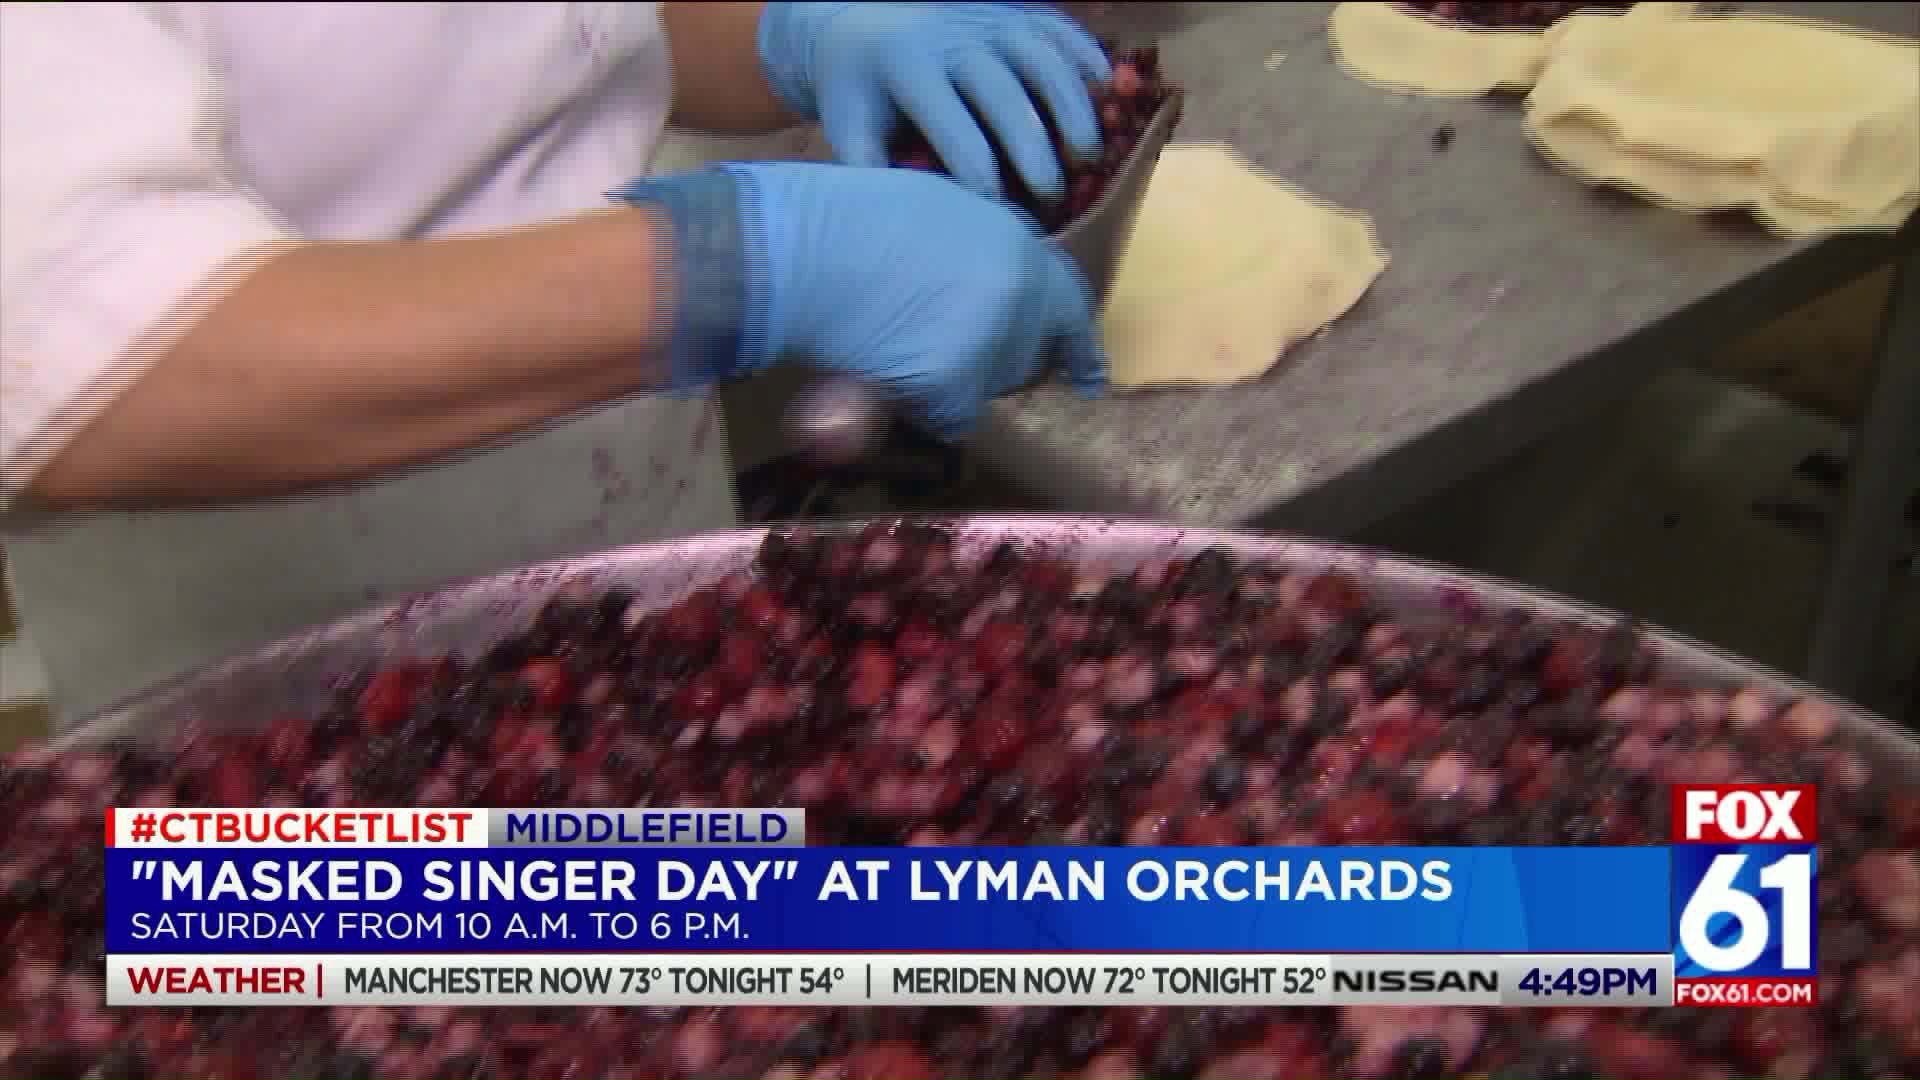 Masked Singer Day at Lyman Orchards